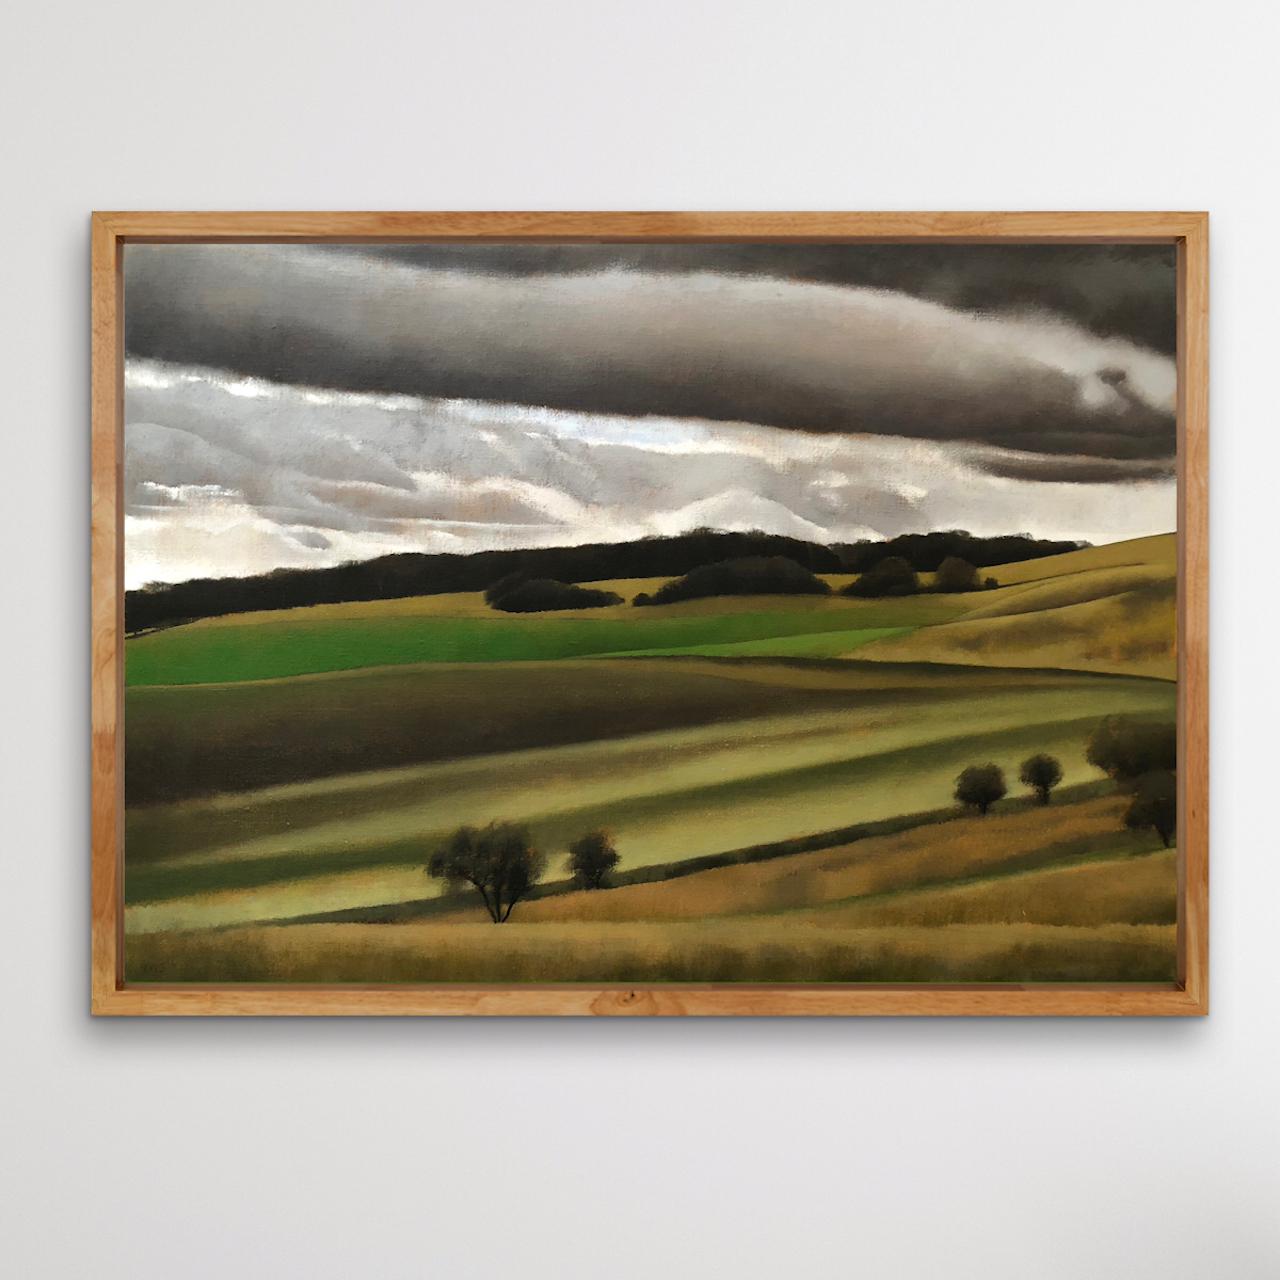 Near Ashridge is an Original Landscape Painting depicting the rolling hills of Hertfordshire looking onto the Ashridge woods with stormy skies.

Artist Tim Woodcock-Jones original paintings are available for sale with Wychwood Art. Discover new